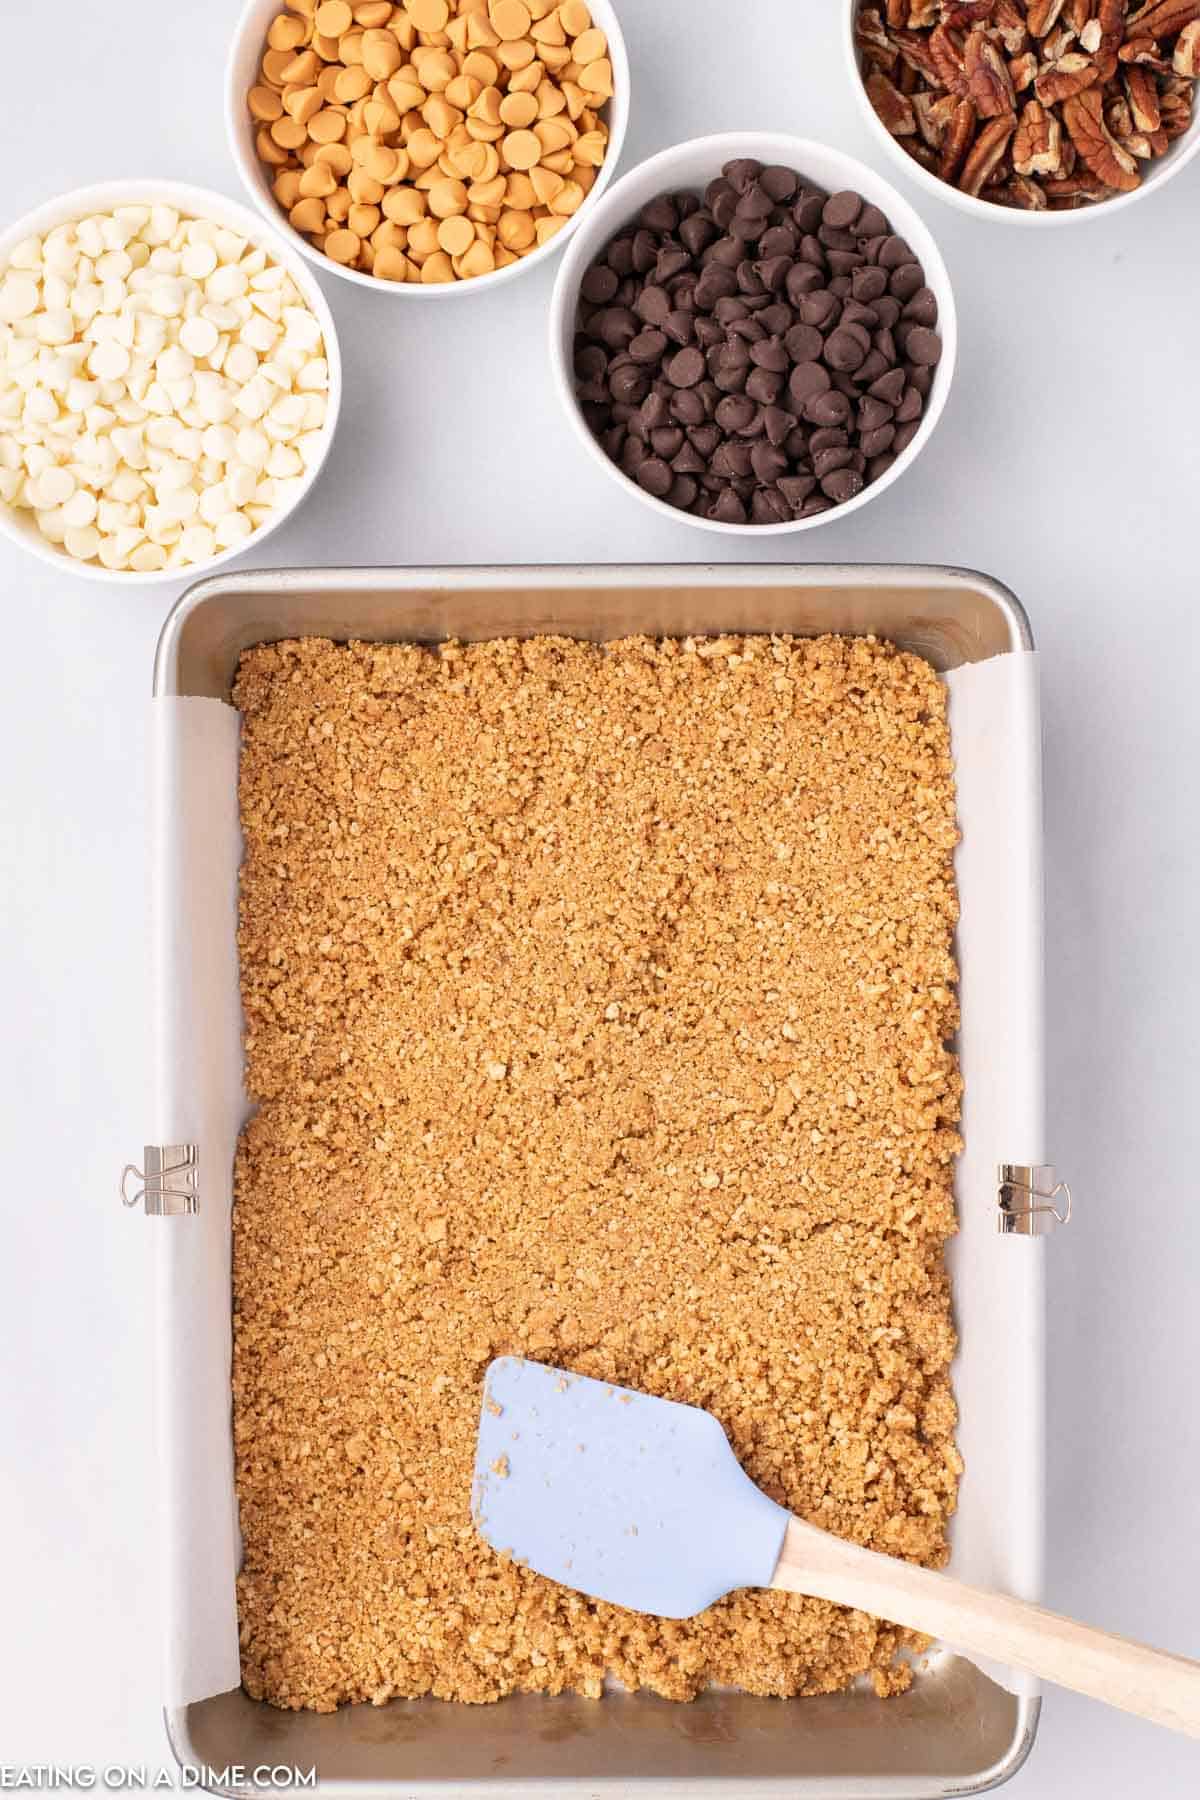 Pressing the graham cracker crumbs in a baking dish with a spatula and bowl of chocolate chips and pecans on the side